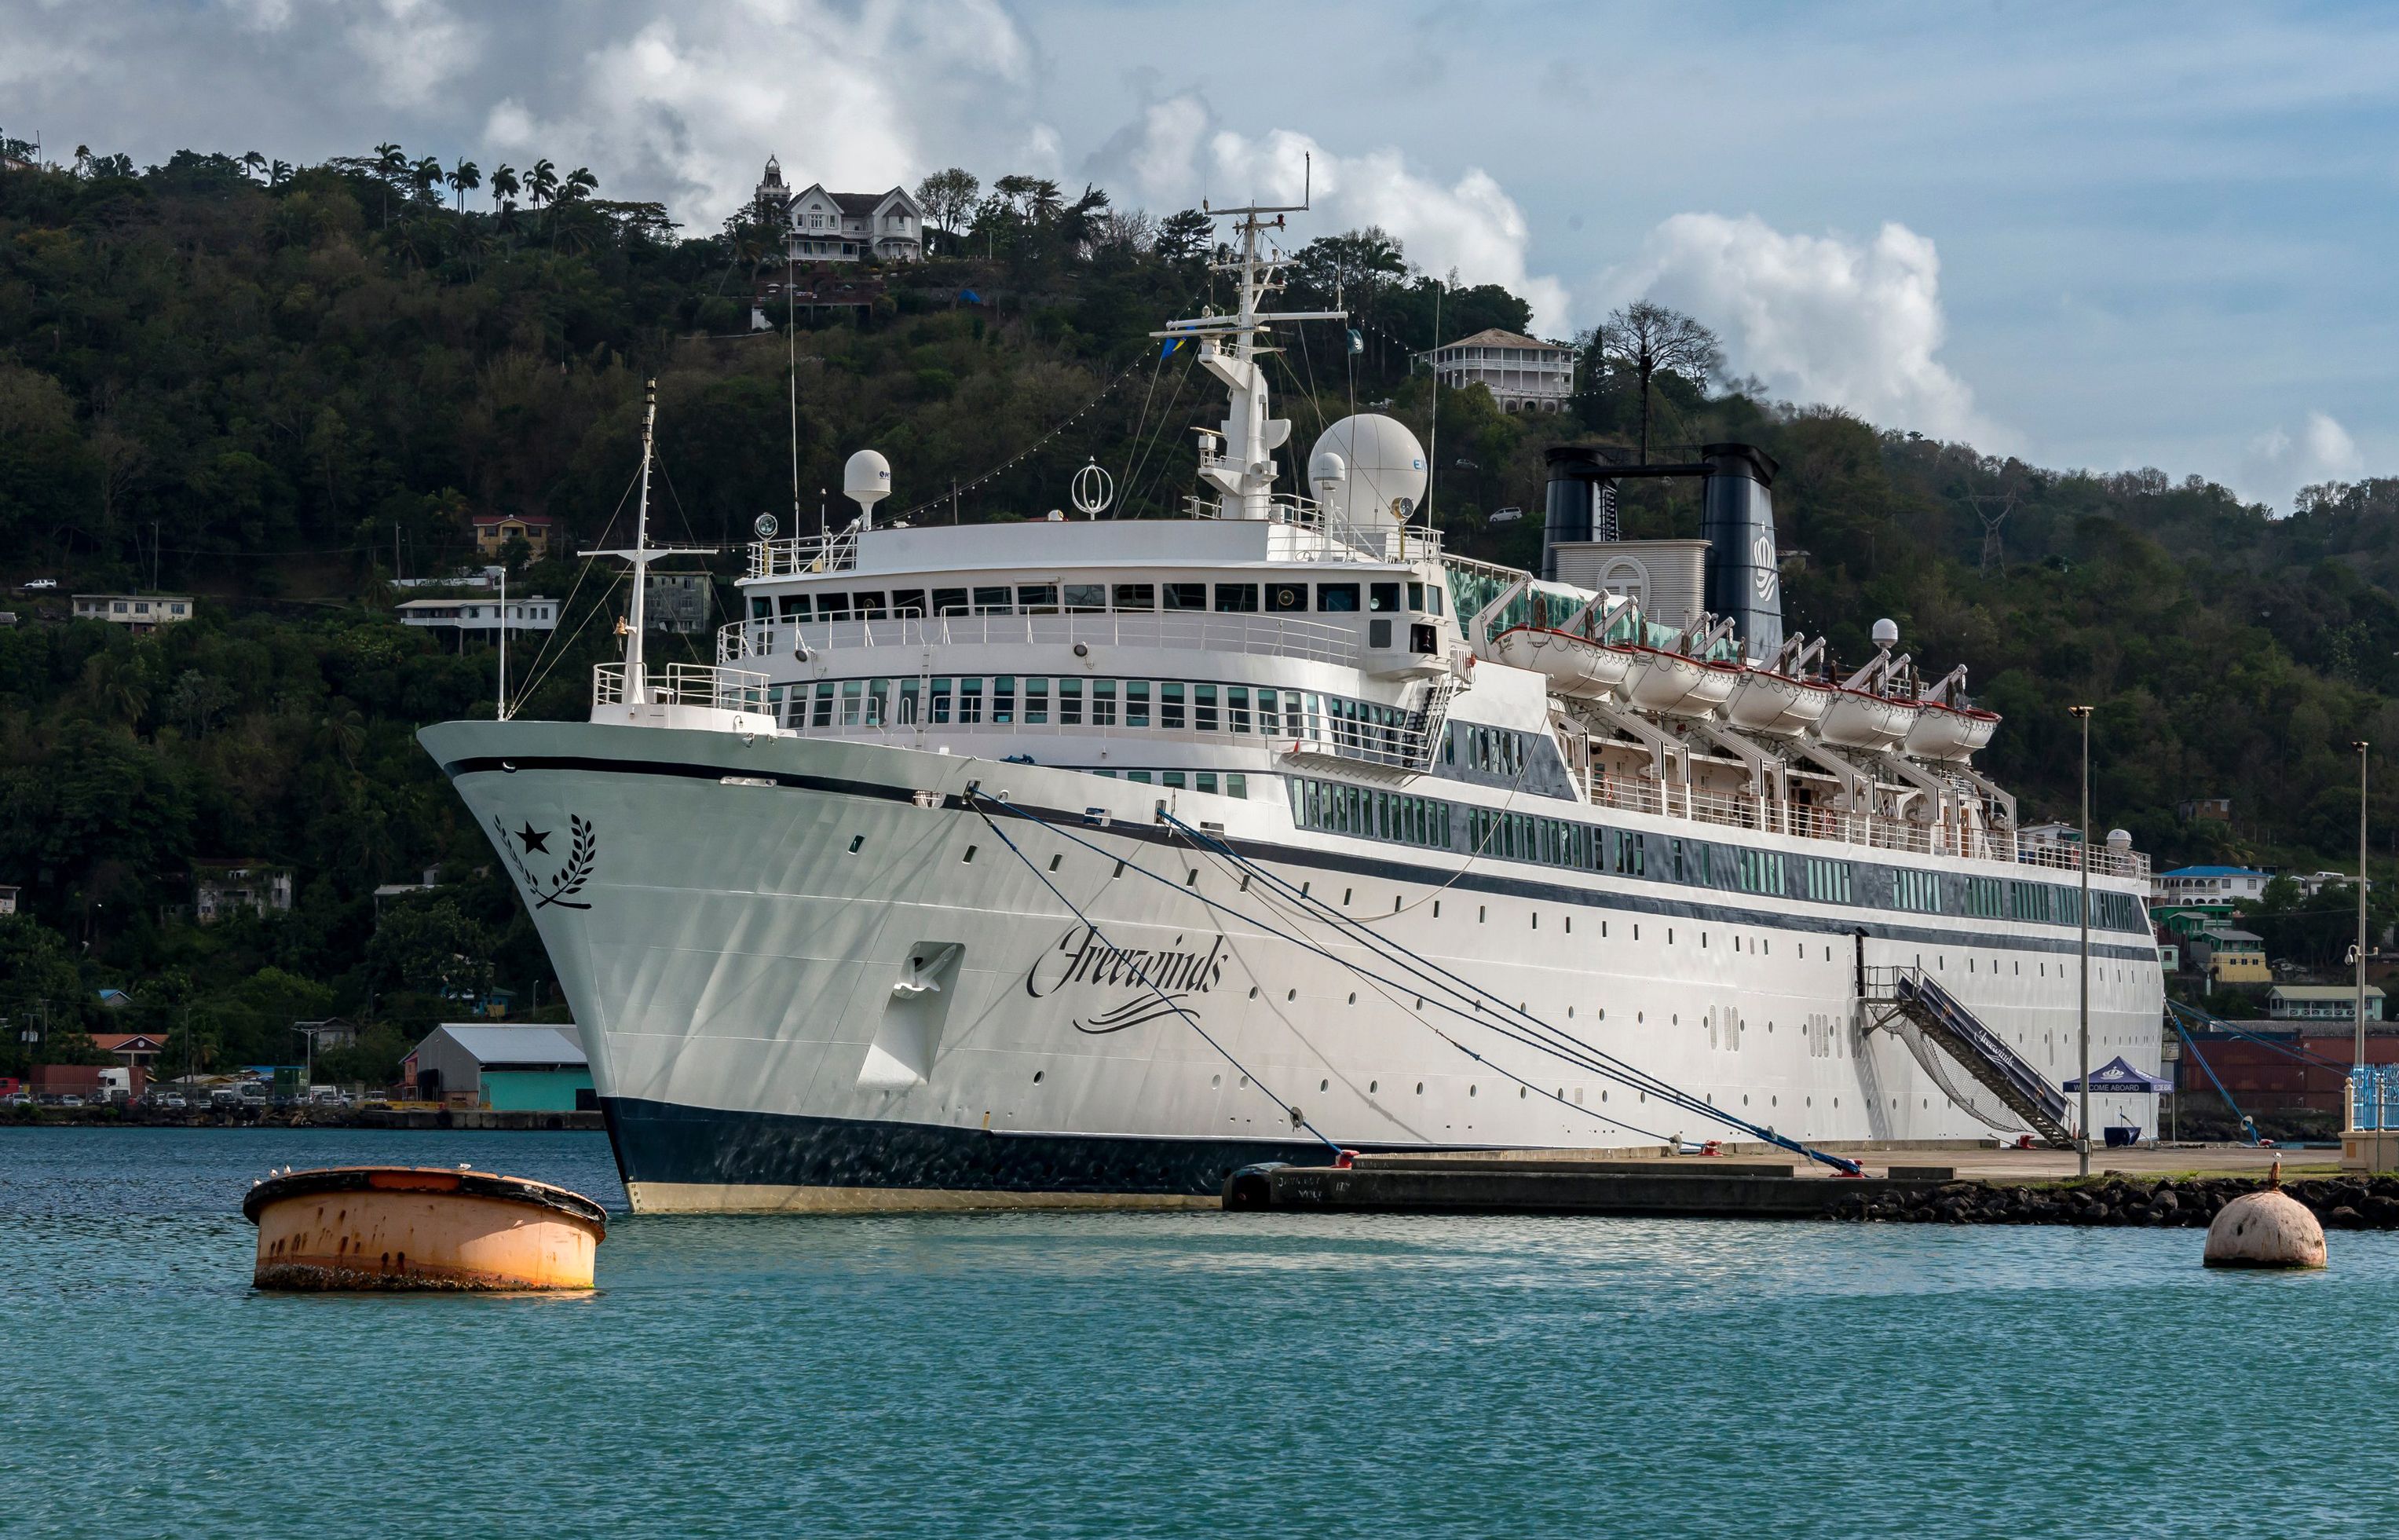 The Freewinds cruise ship owned by the Church of Scientology is seen docked in quarantine at the Point Seraphine terminal in Castries, Saint Lucia, on May 2, 2019, after a measles case was detected onboard. (KIRK ELLIOTT&mdash;AFP/Getty Images)